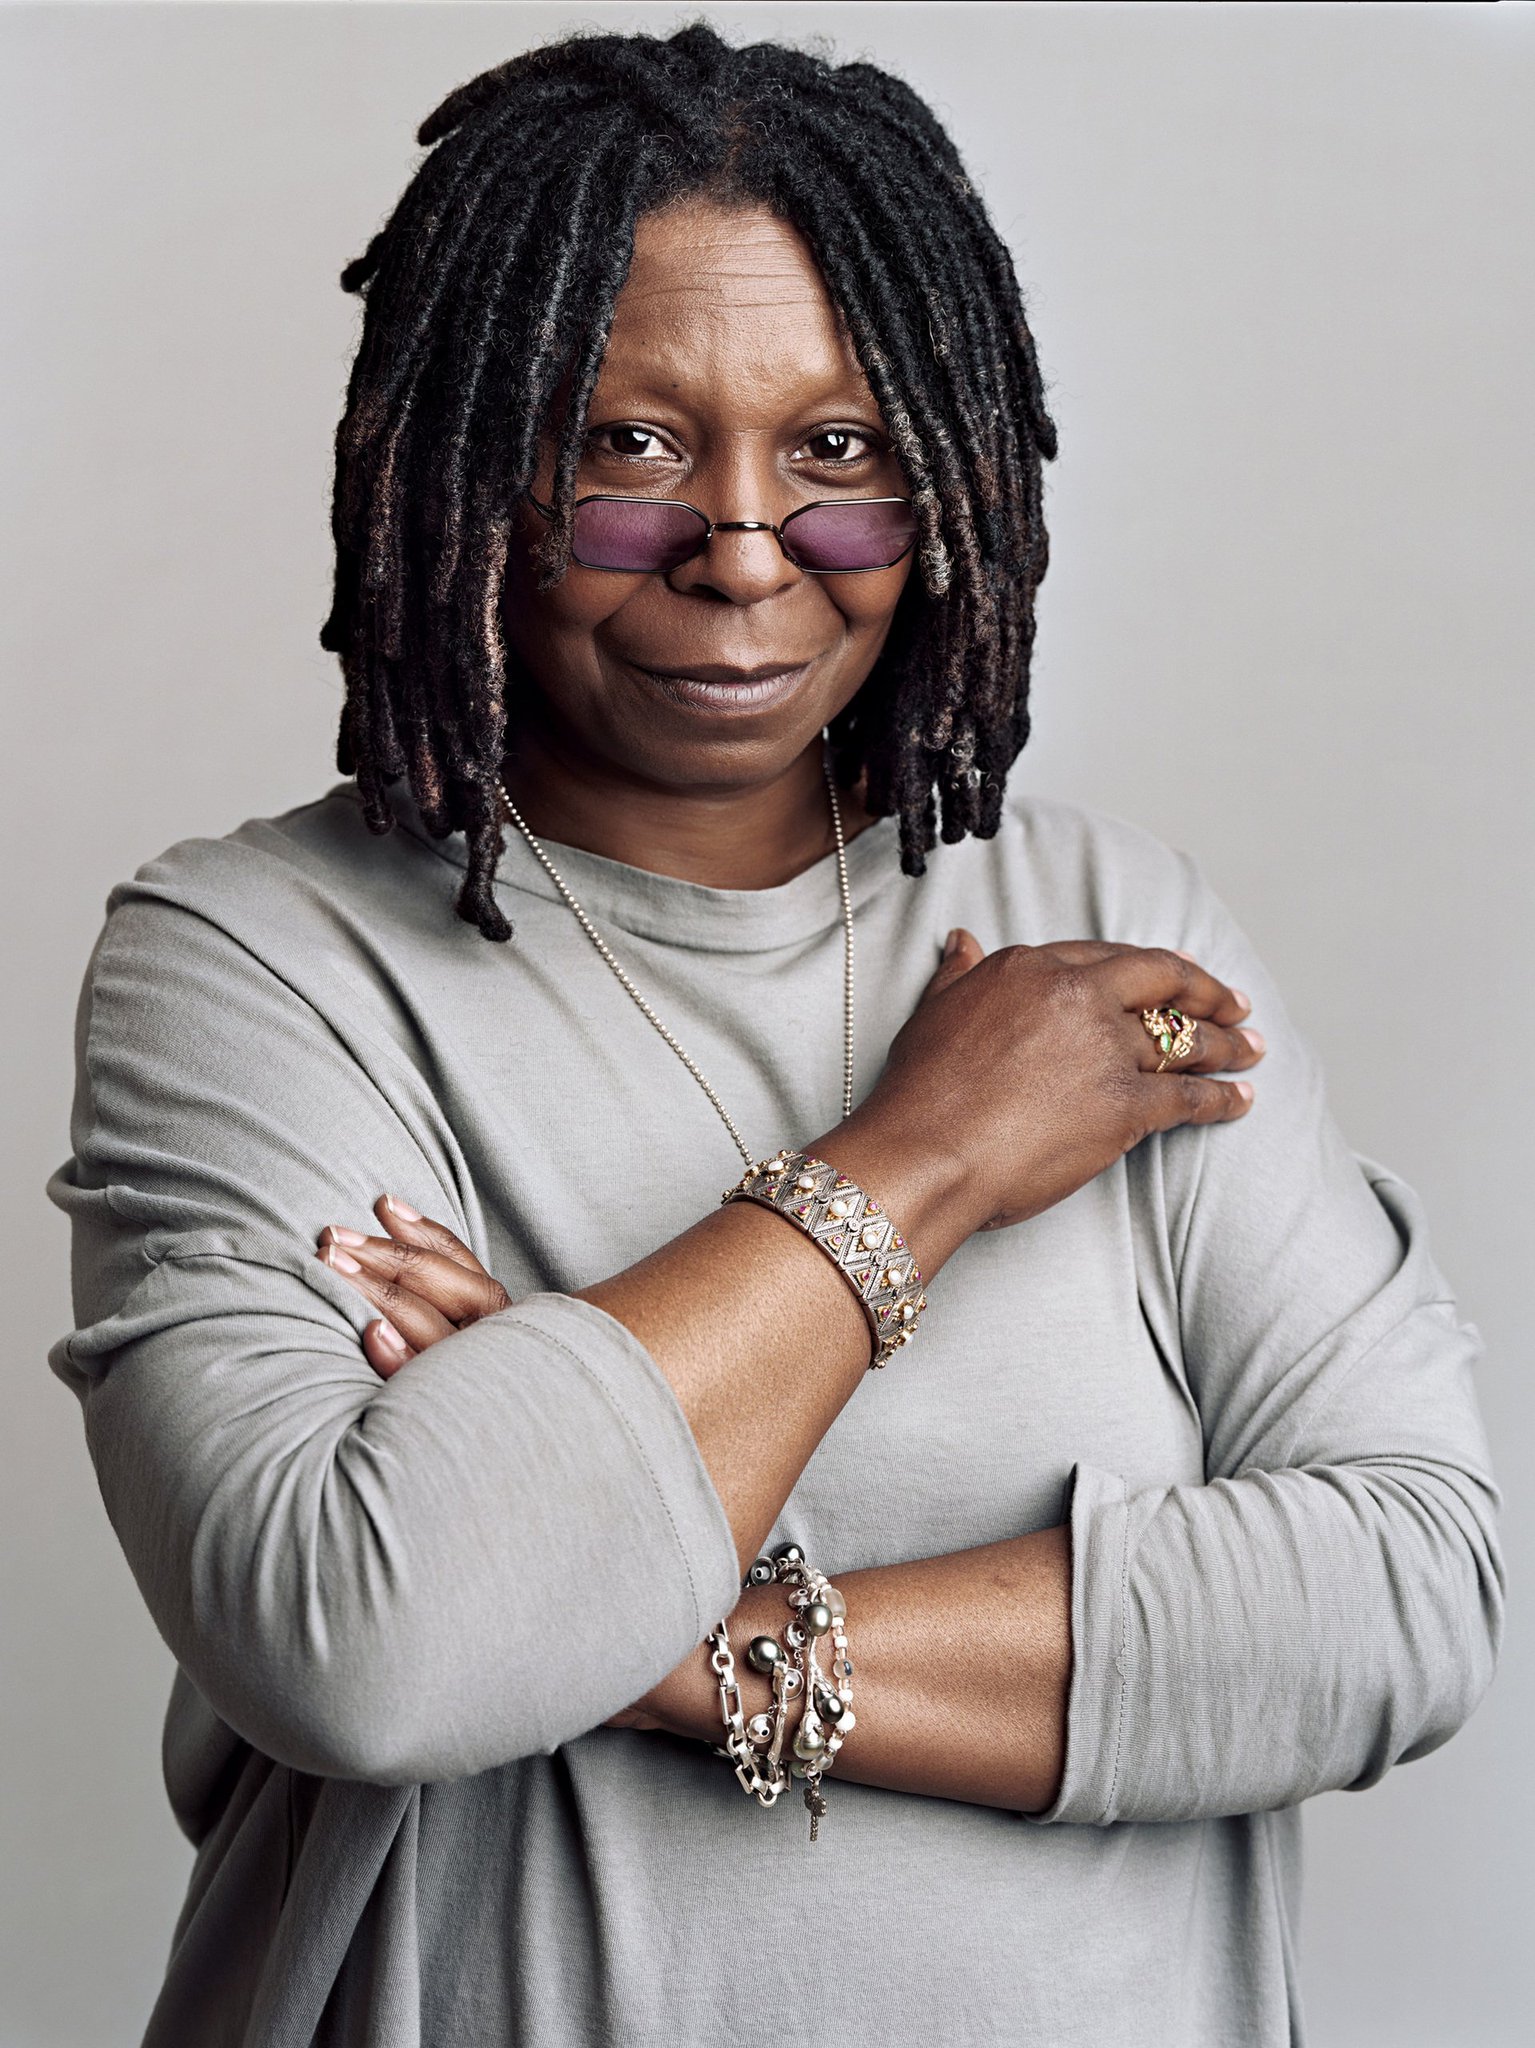 Happy Birthday to Whoopi Goldberg and Gerard Butler!  Hope you both have a fablas day! 